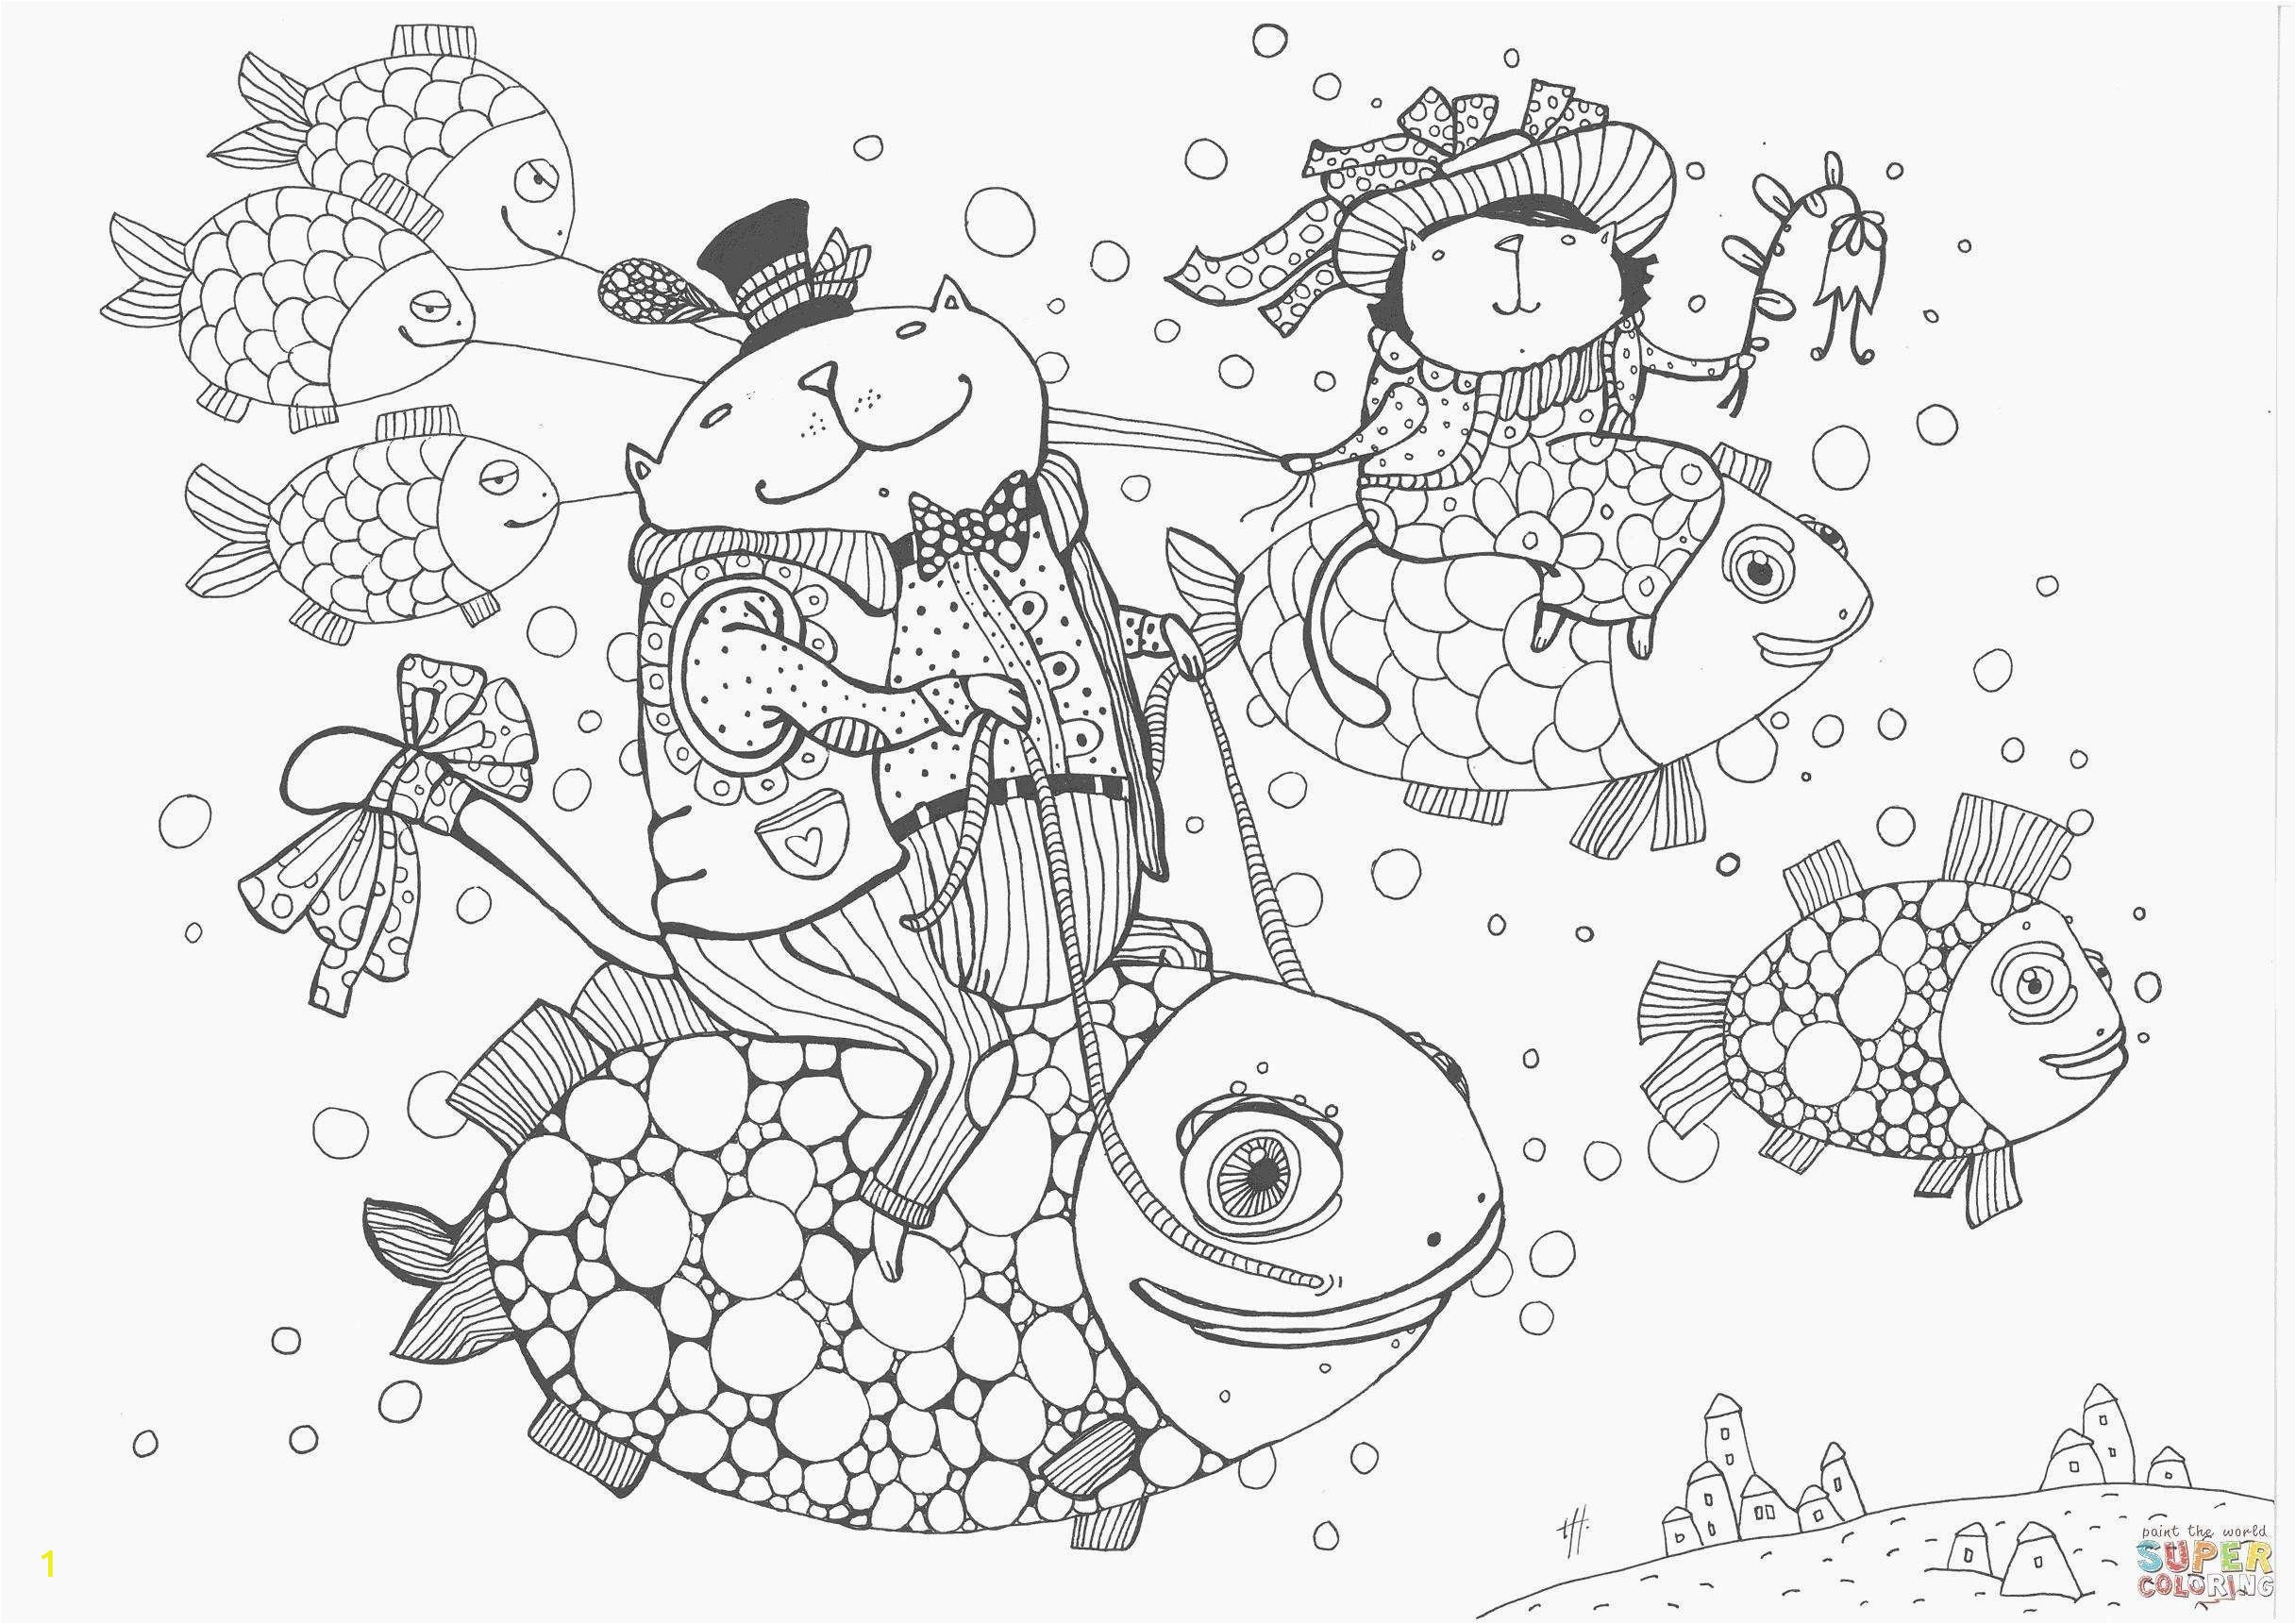 Thanksgiving 2019 Coloring Pages Awesome Image Of Thanksgiving Color by Number Pages Vi S